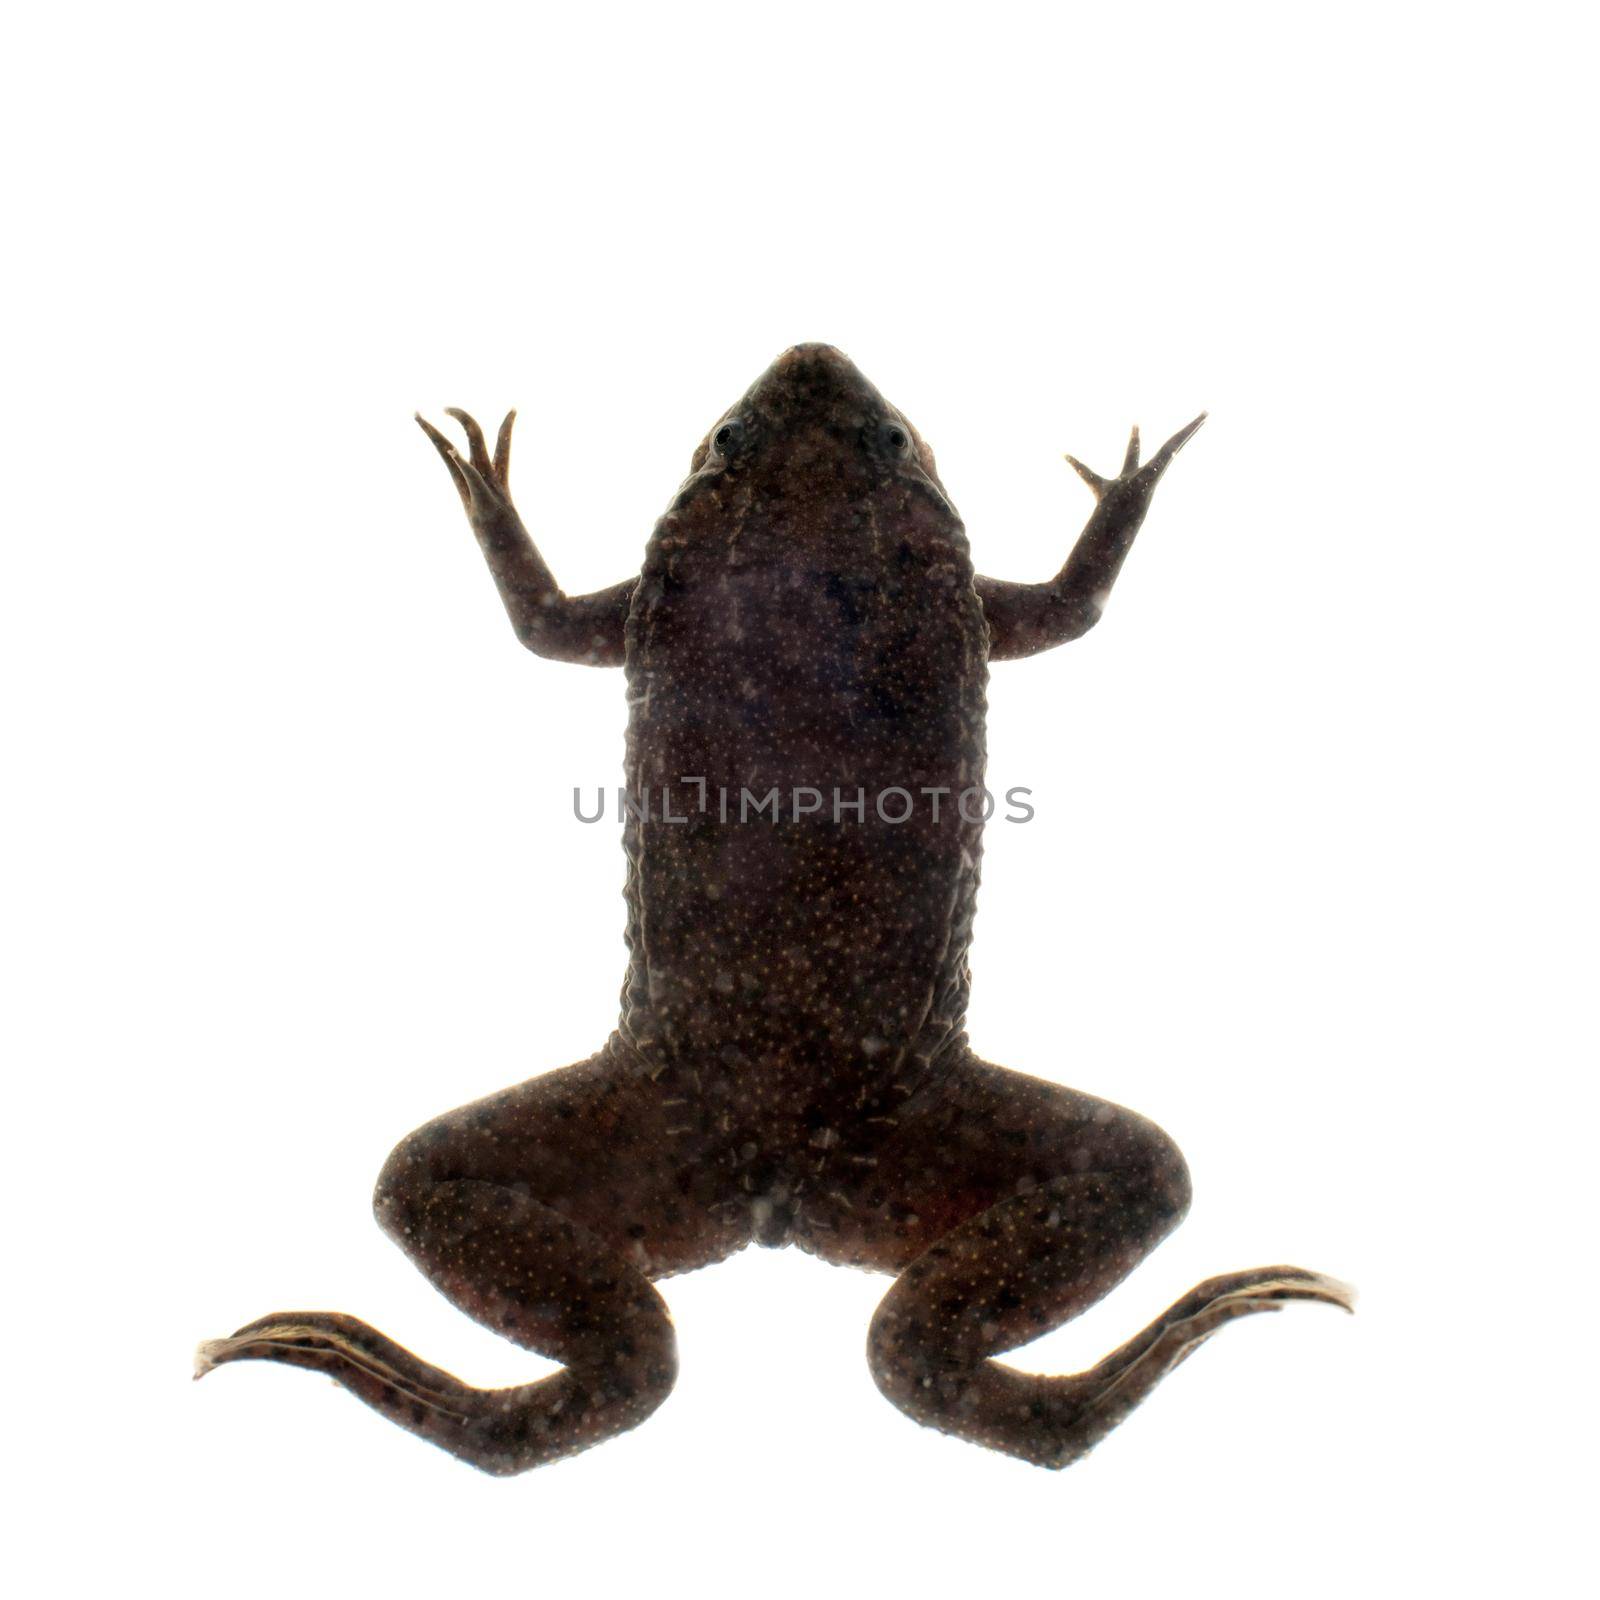 Carvalho's Surinam toad, Pipa carvalhoi, isolated on white background